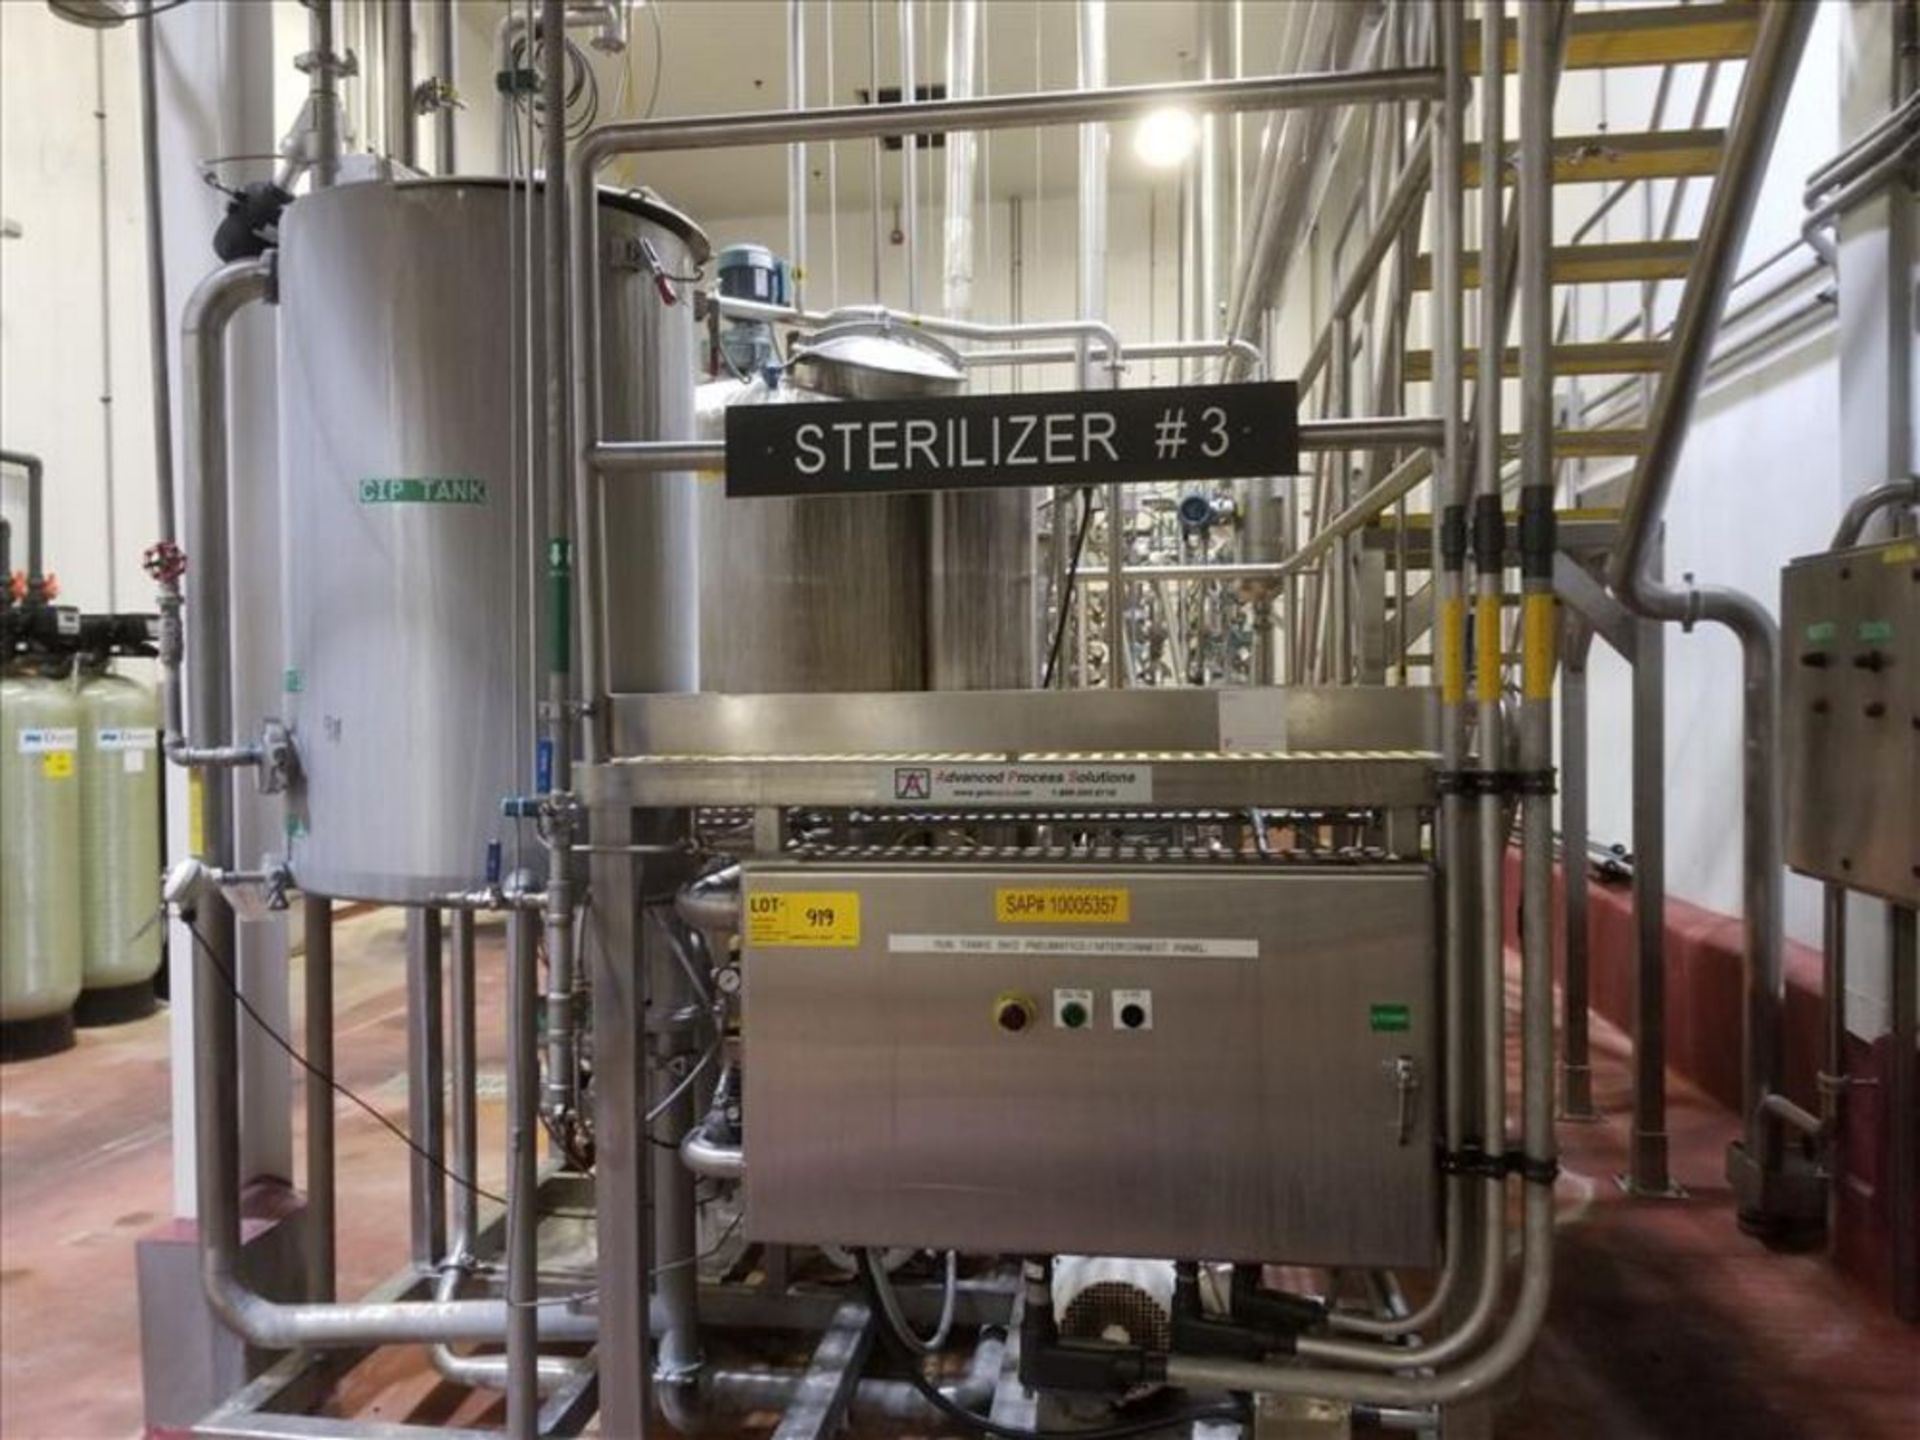 Sterilizing System # 3 BULK LOT from lot 919A to lot 919F -  Winner will be determined based on